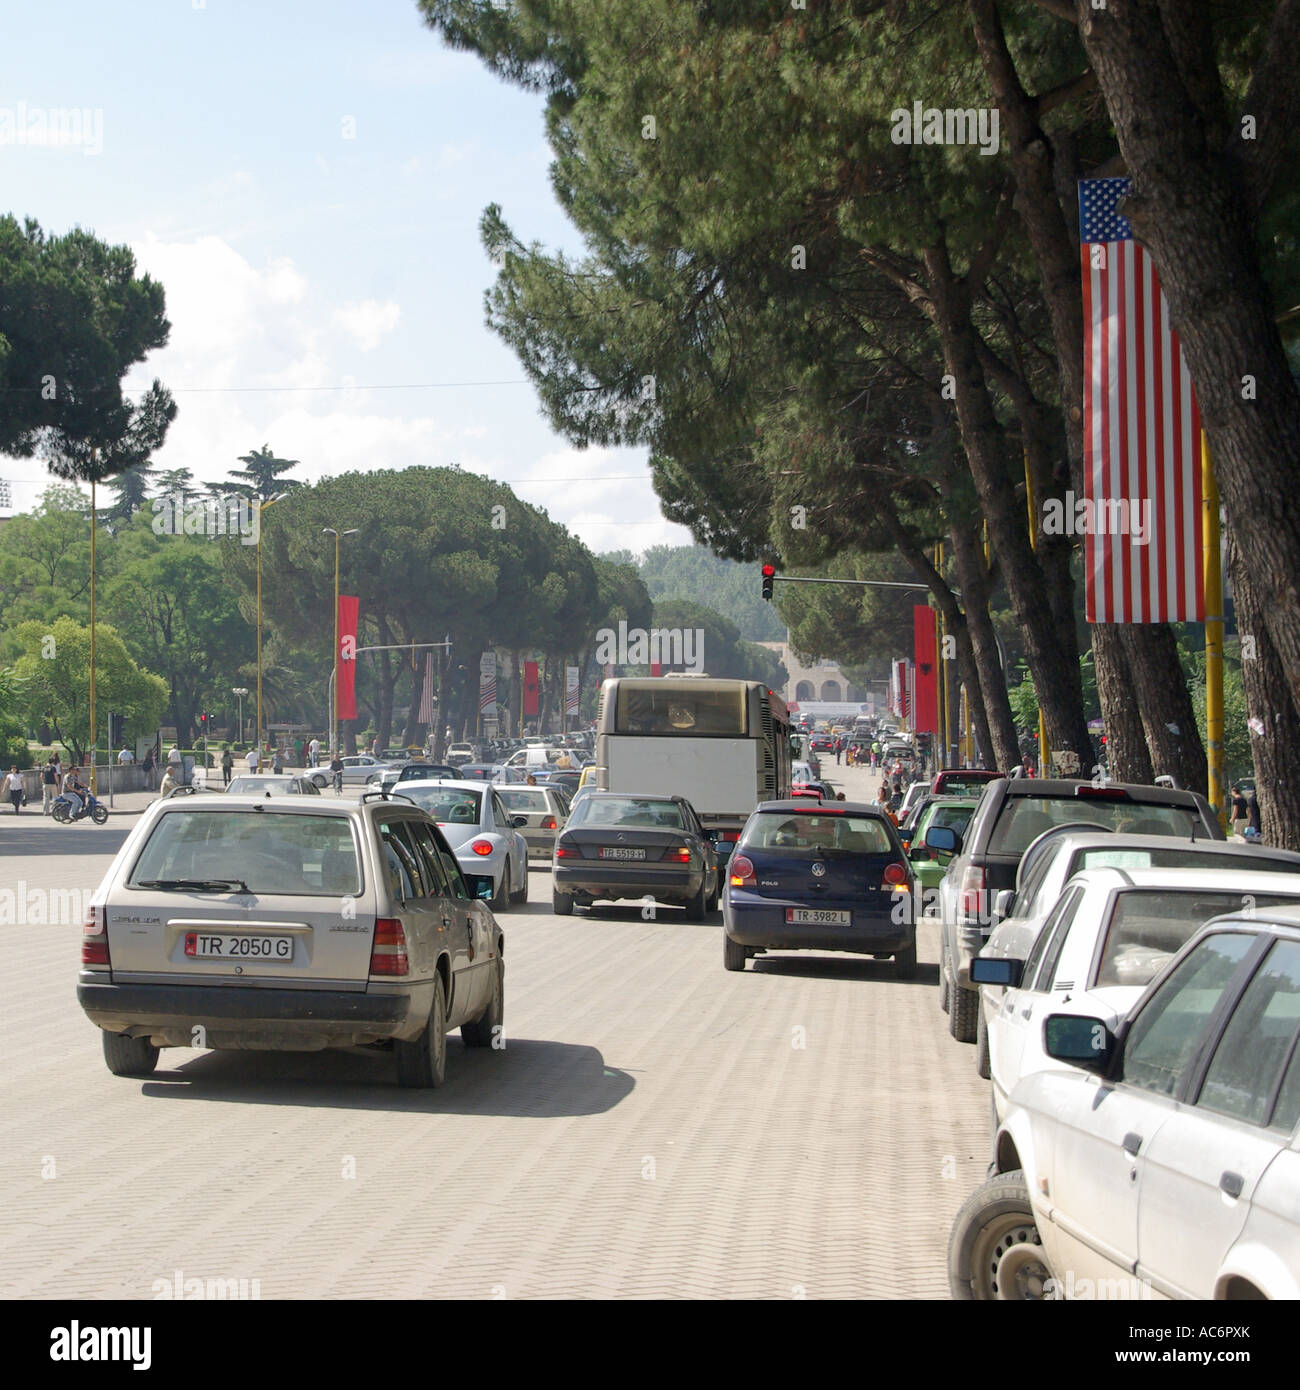 Traffic & street scene in Tirana Republic of Albania main road from Skanderbeg Square USA banner flags  for America state visit by American President Stock Photo